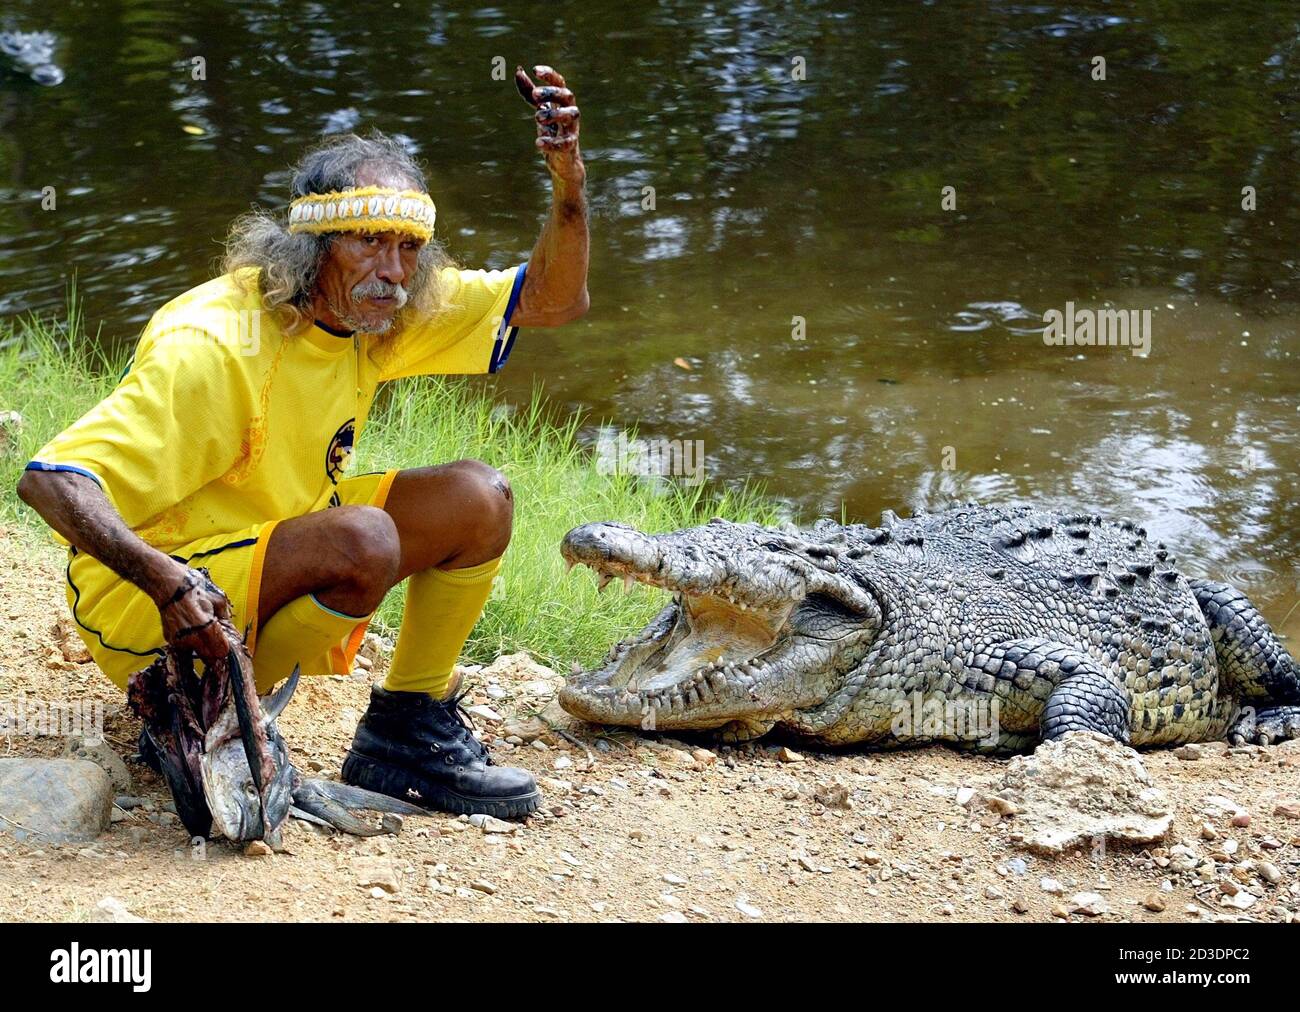 PHOTO TAKEN 01AUG03- Mexican crocodile trainer Tamacun feeds a crocodile  during a show in the tourist resort of Playa Linda Ixtapa in the Mexican  State of Guerrero, August 1, 2003. Tamacun regularly